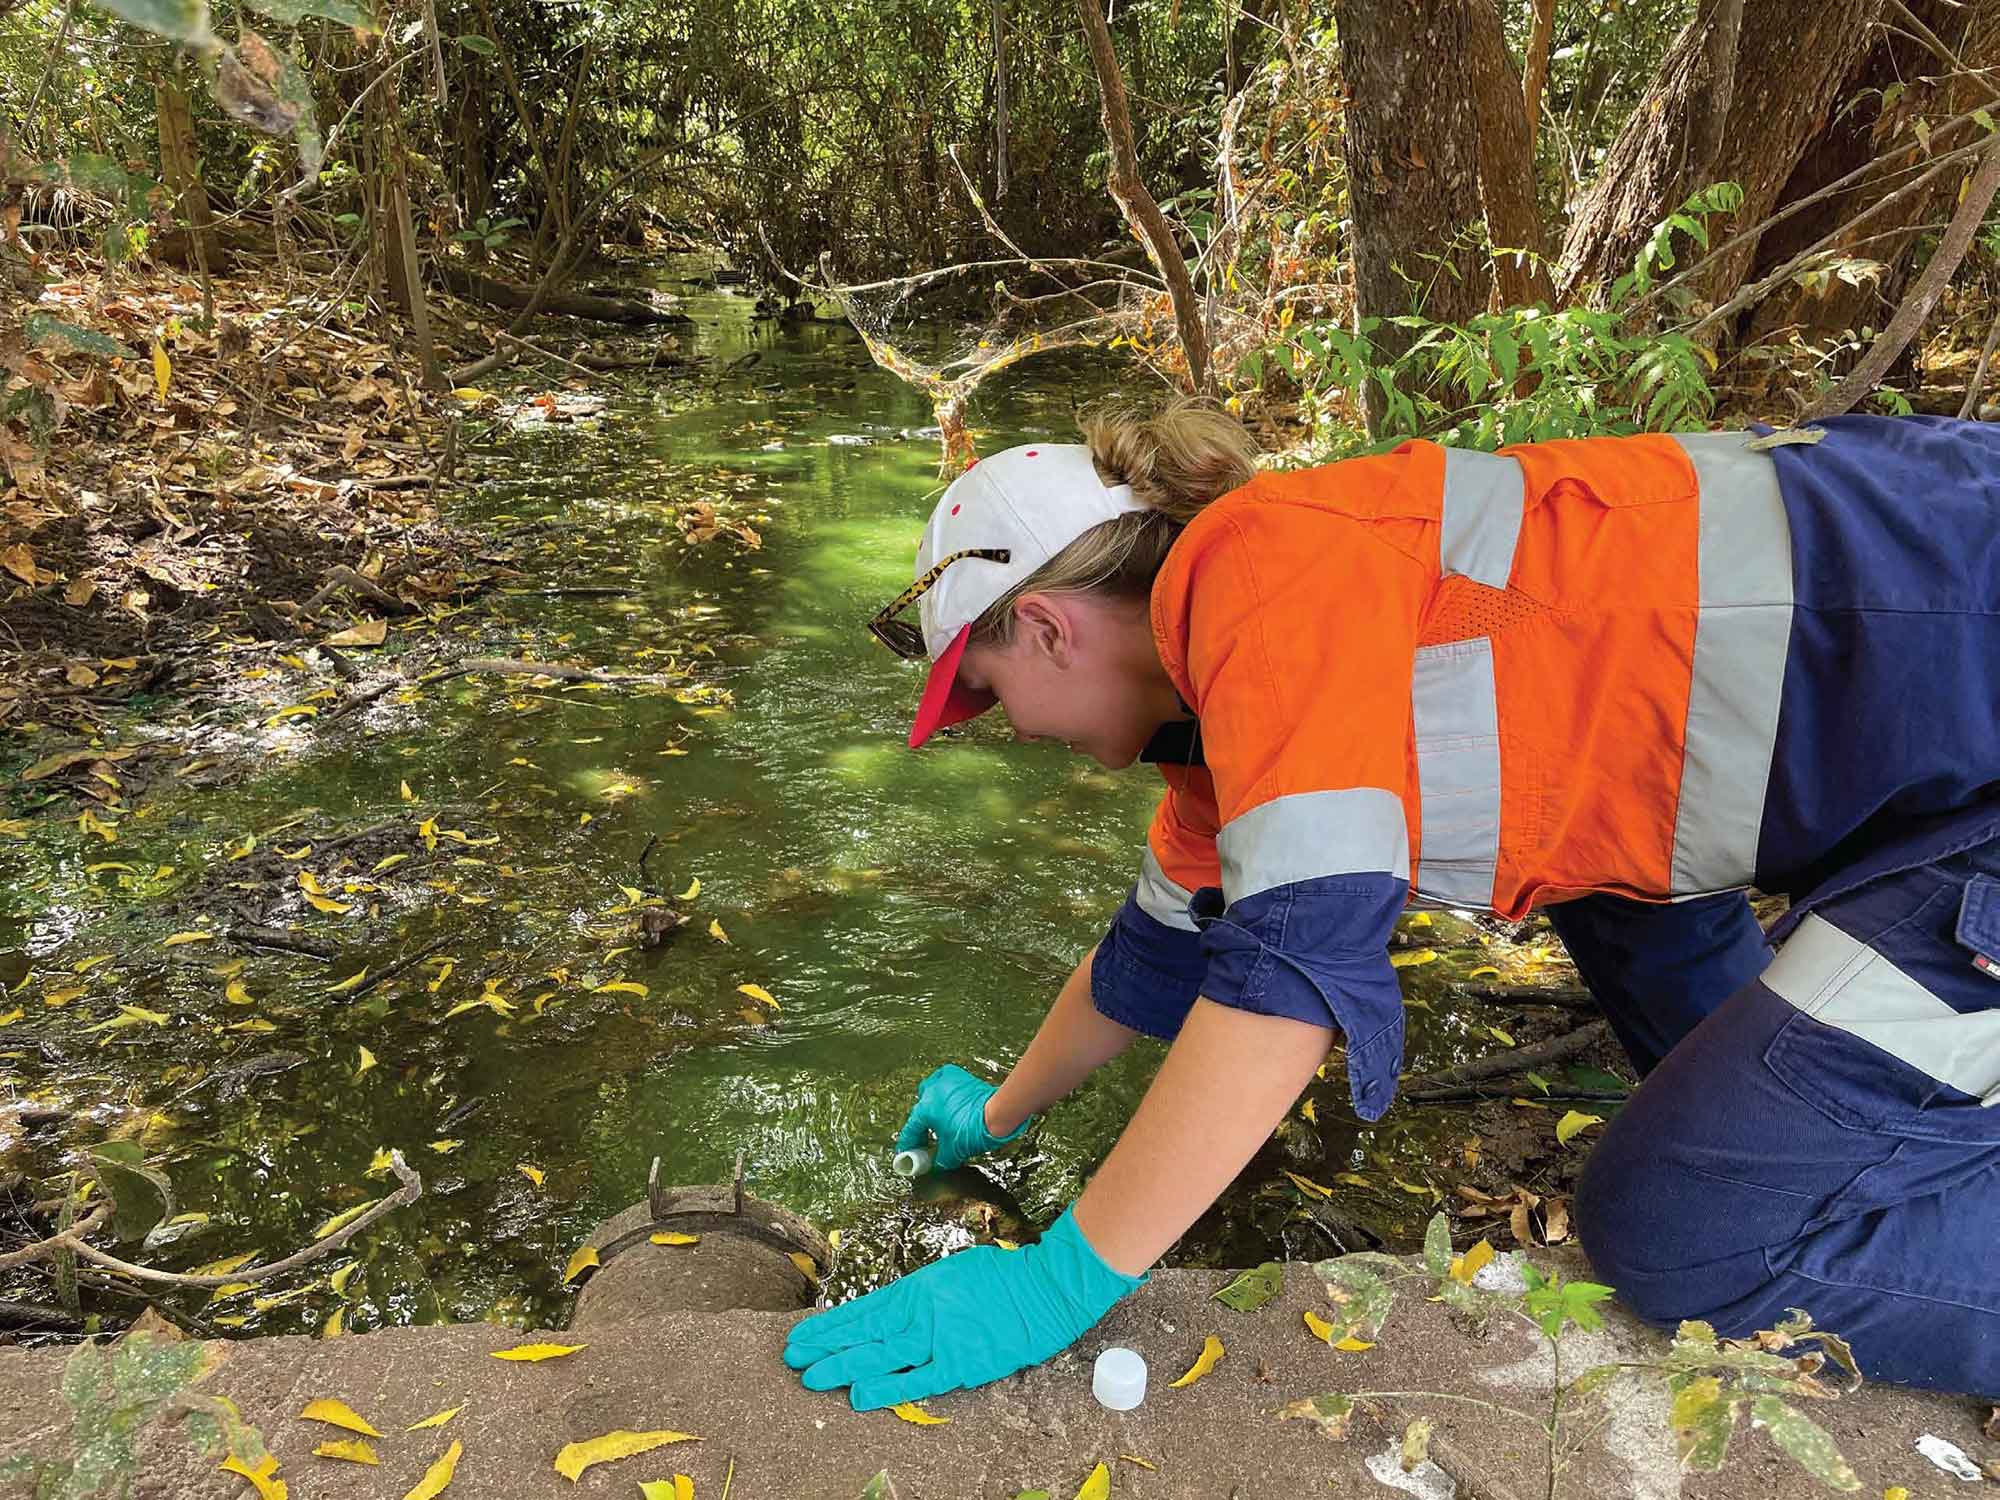 Worker sampling water from a body of water.